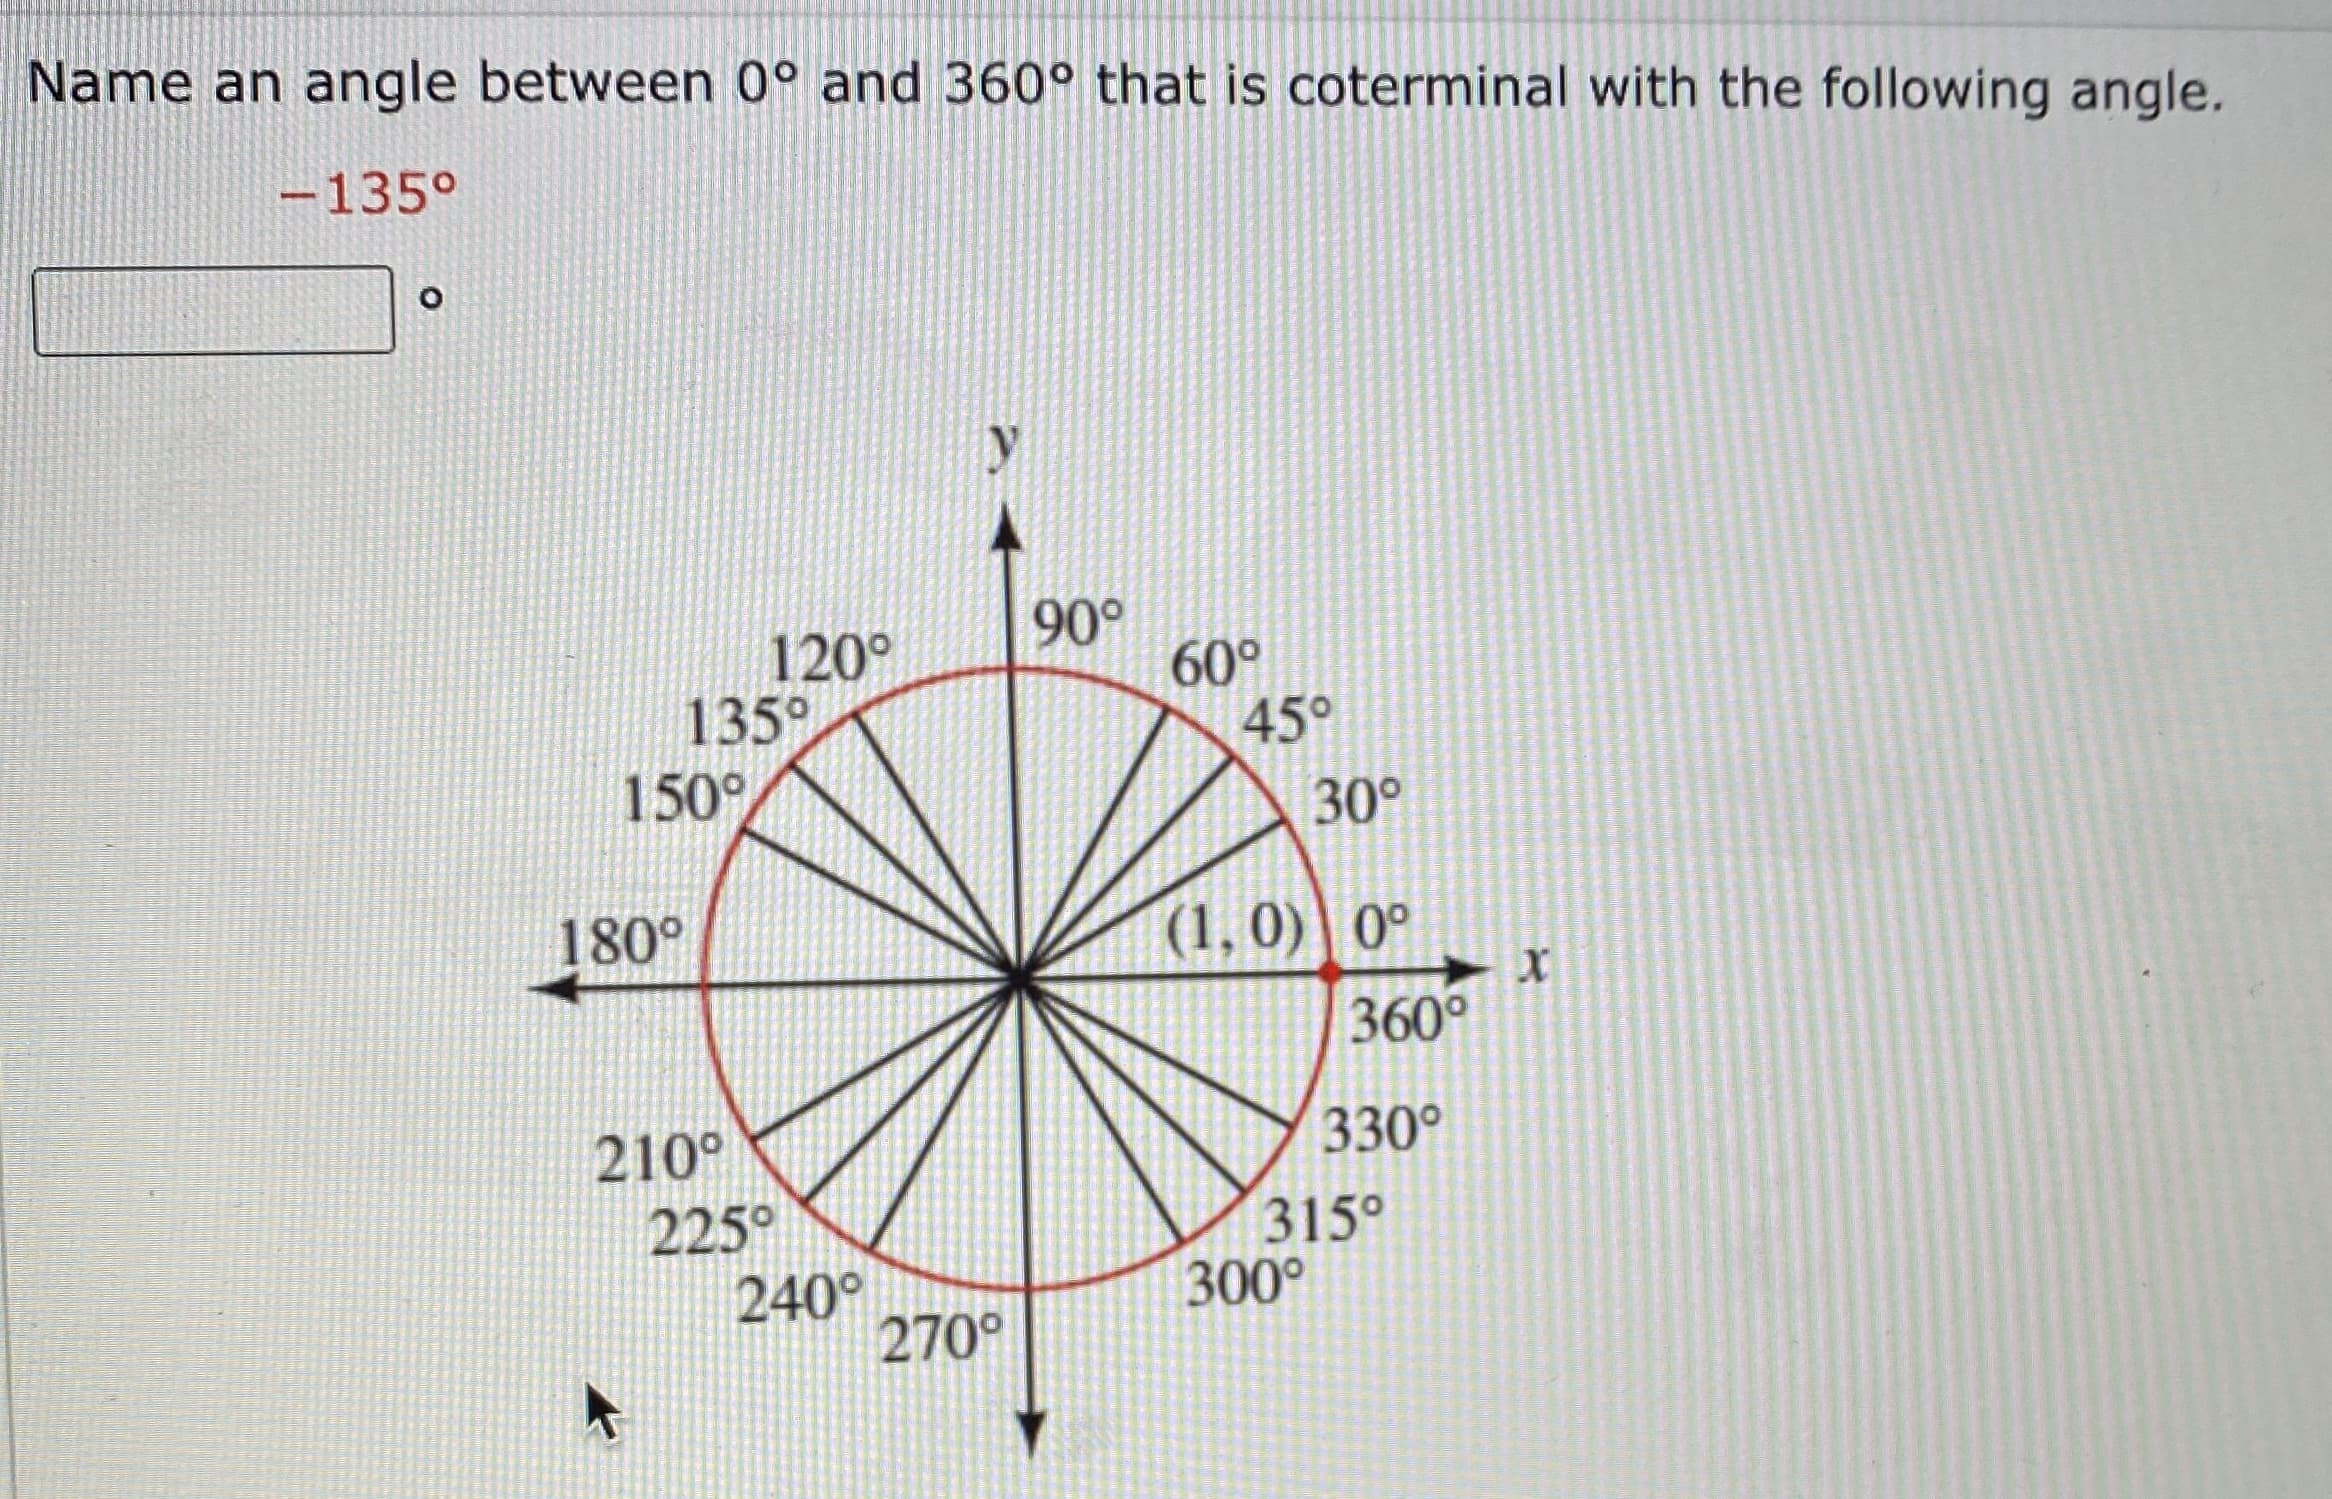 Name an angle between 0° and 360° that is coterminal with the following angle.
-135°
